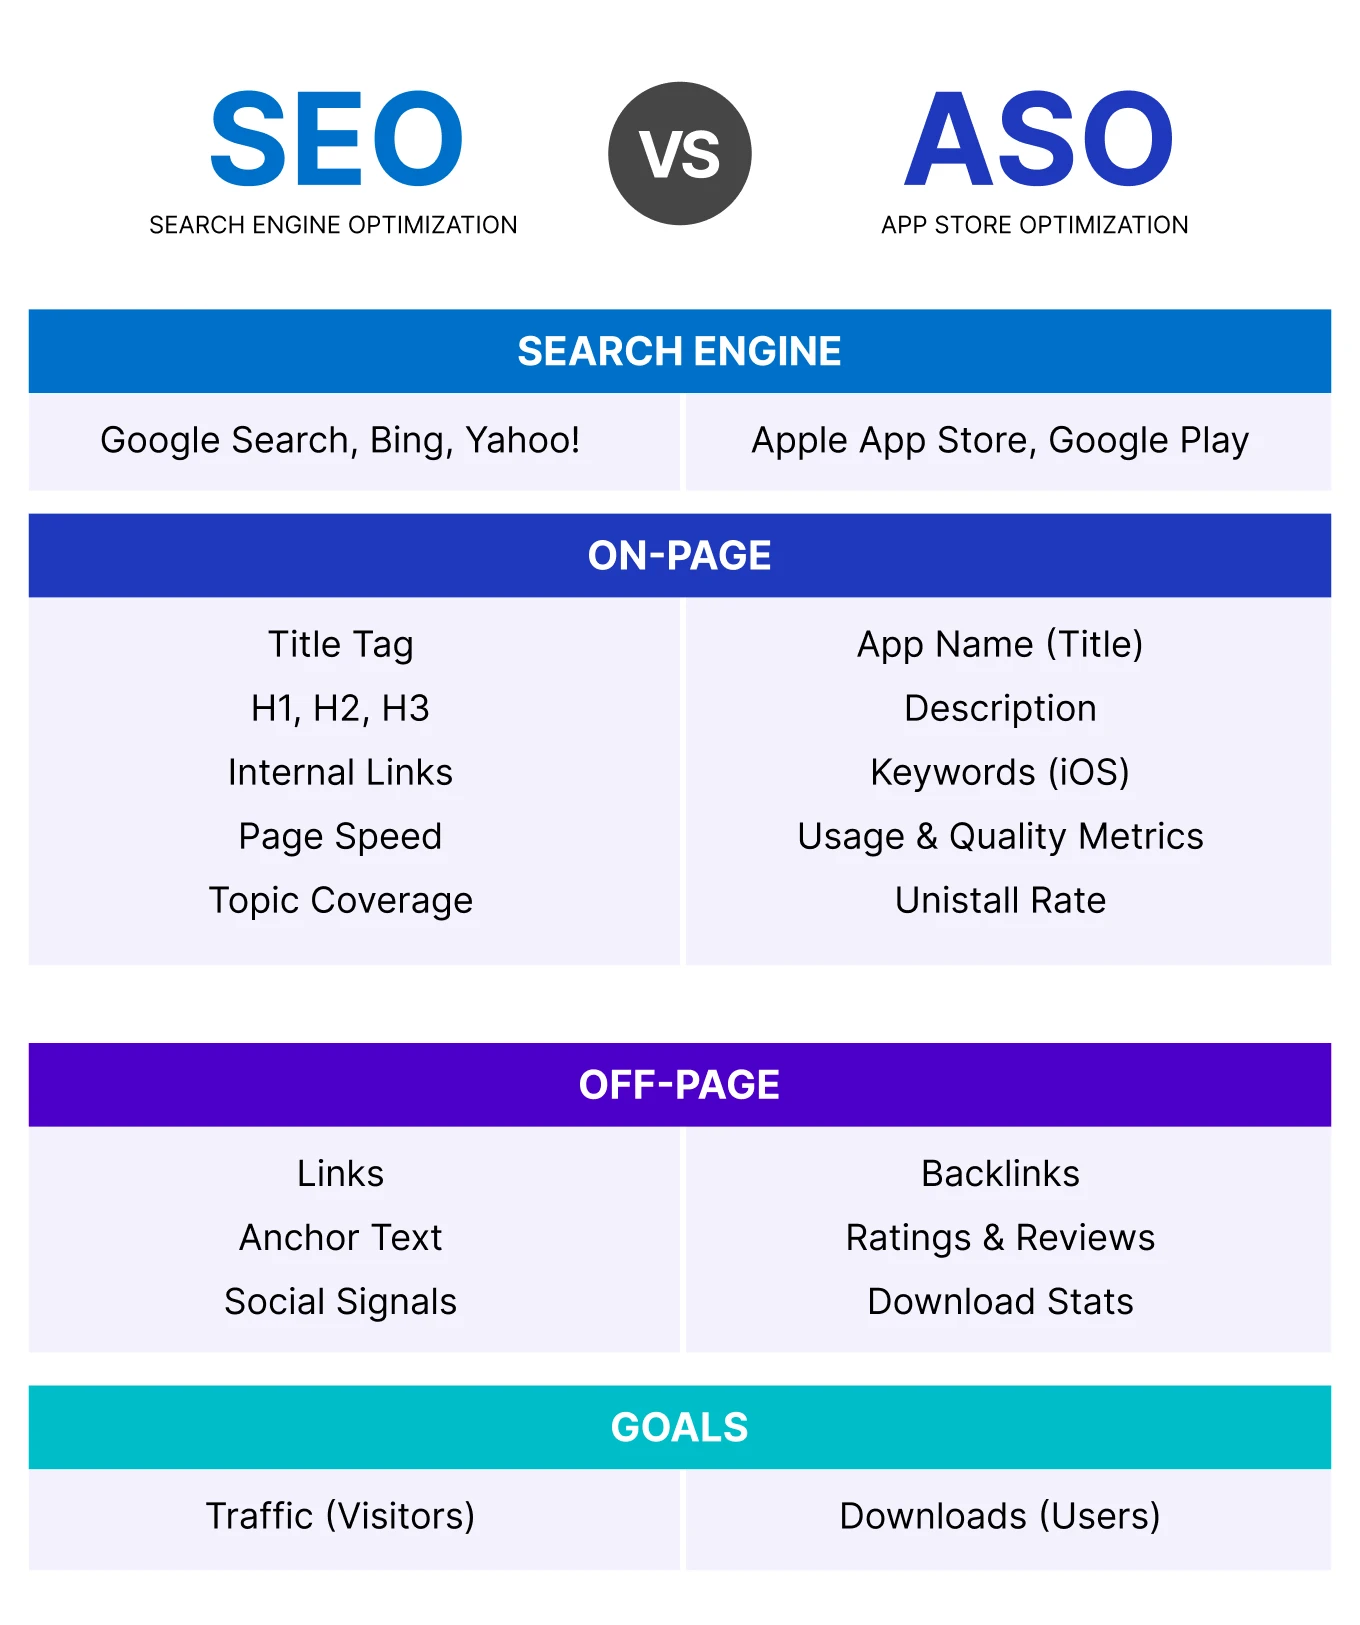 marketing small business: SEO and ASO differences